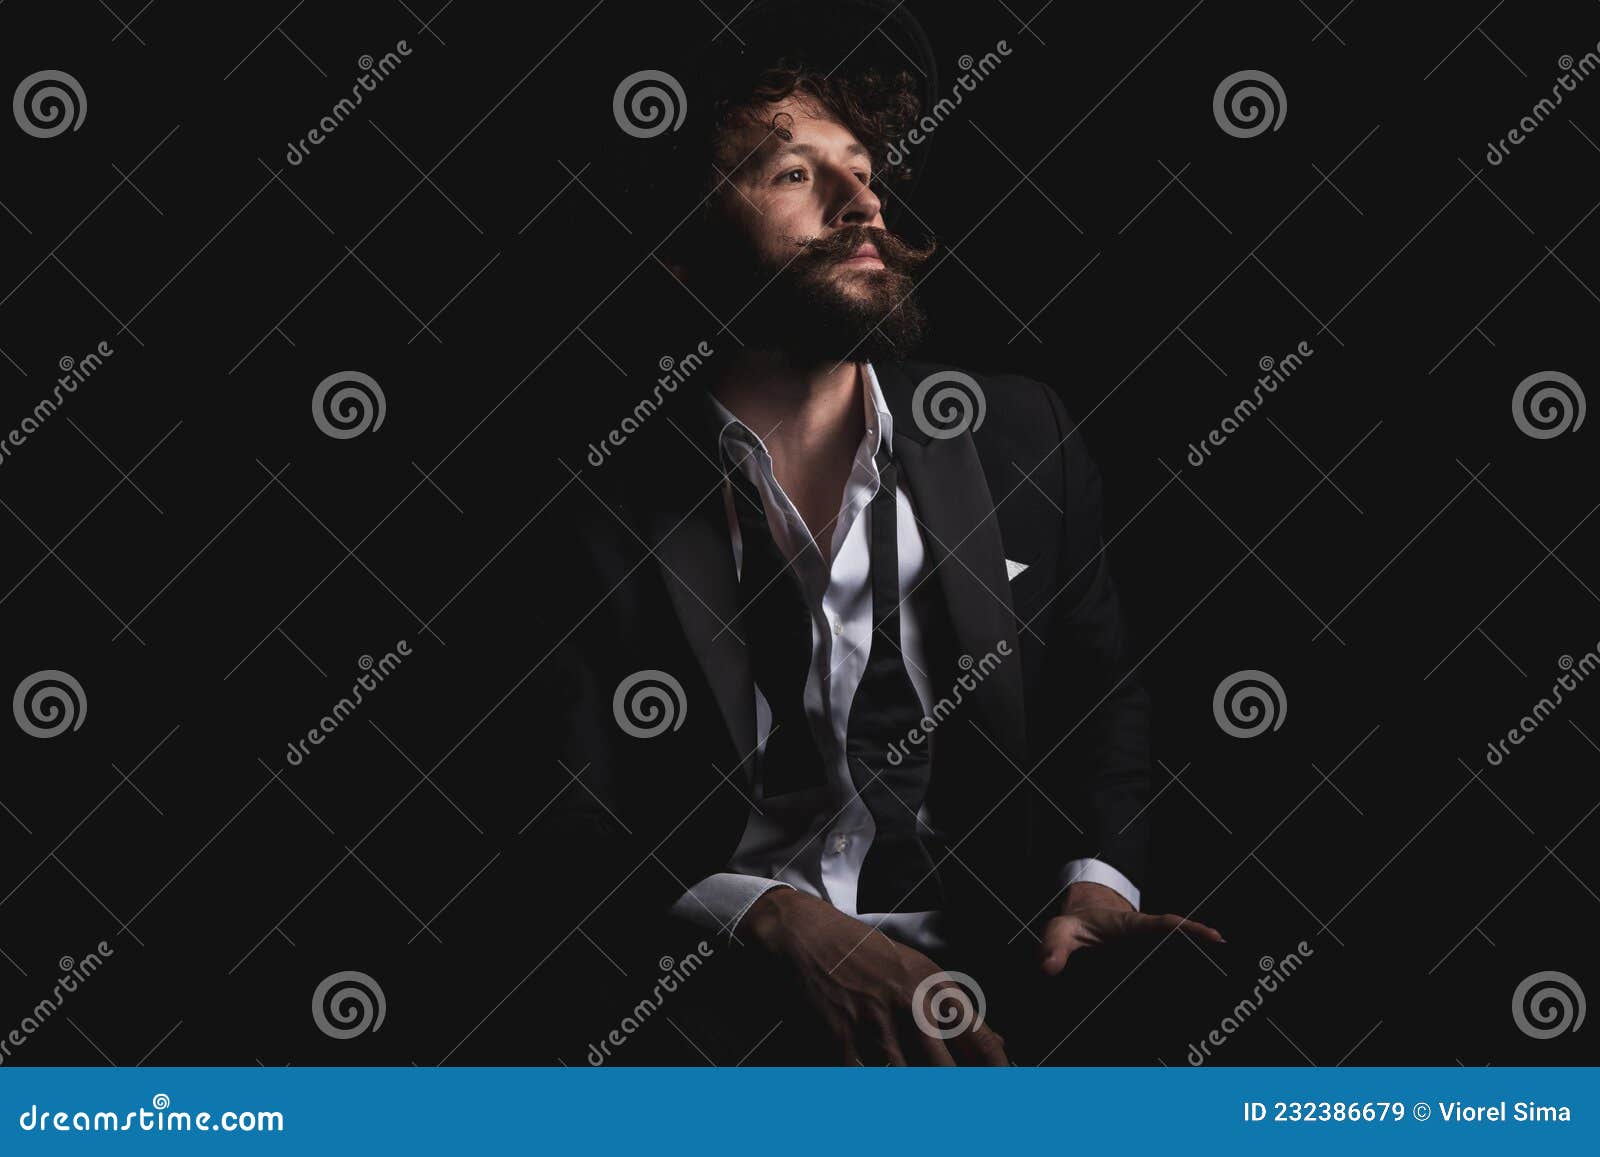 Businessman with Undone Bowtie is Looking Away Stock Image - Image of ...